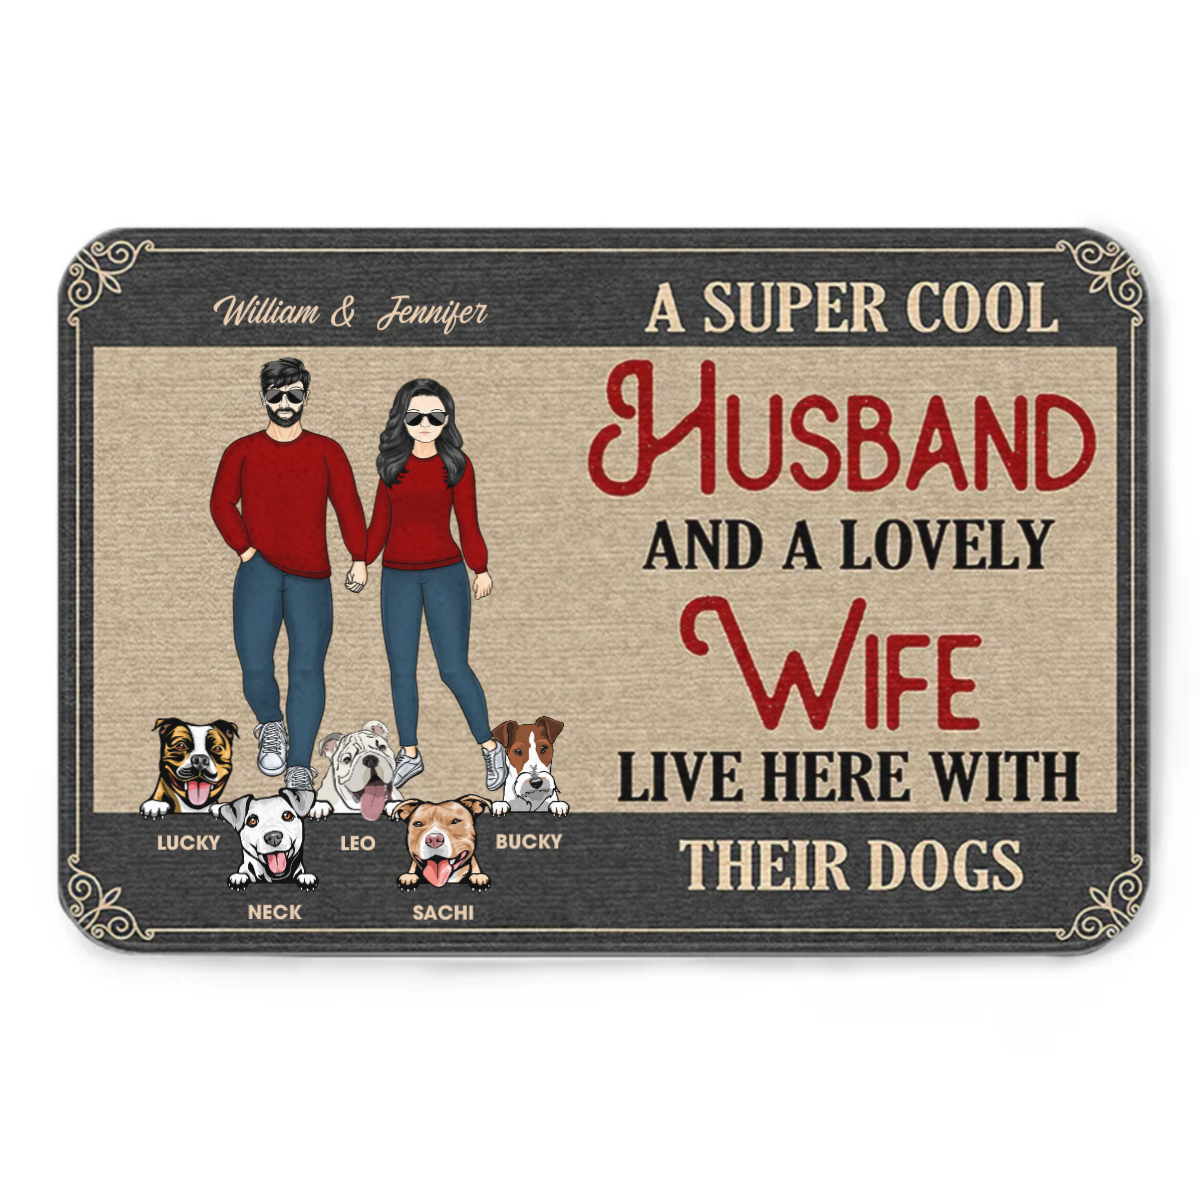 Cool Husband And A Lovely Wife Live Here With Their Dogs - Gift For Dog Lover - Personalized Custom Doormat